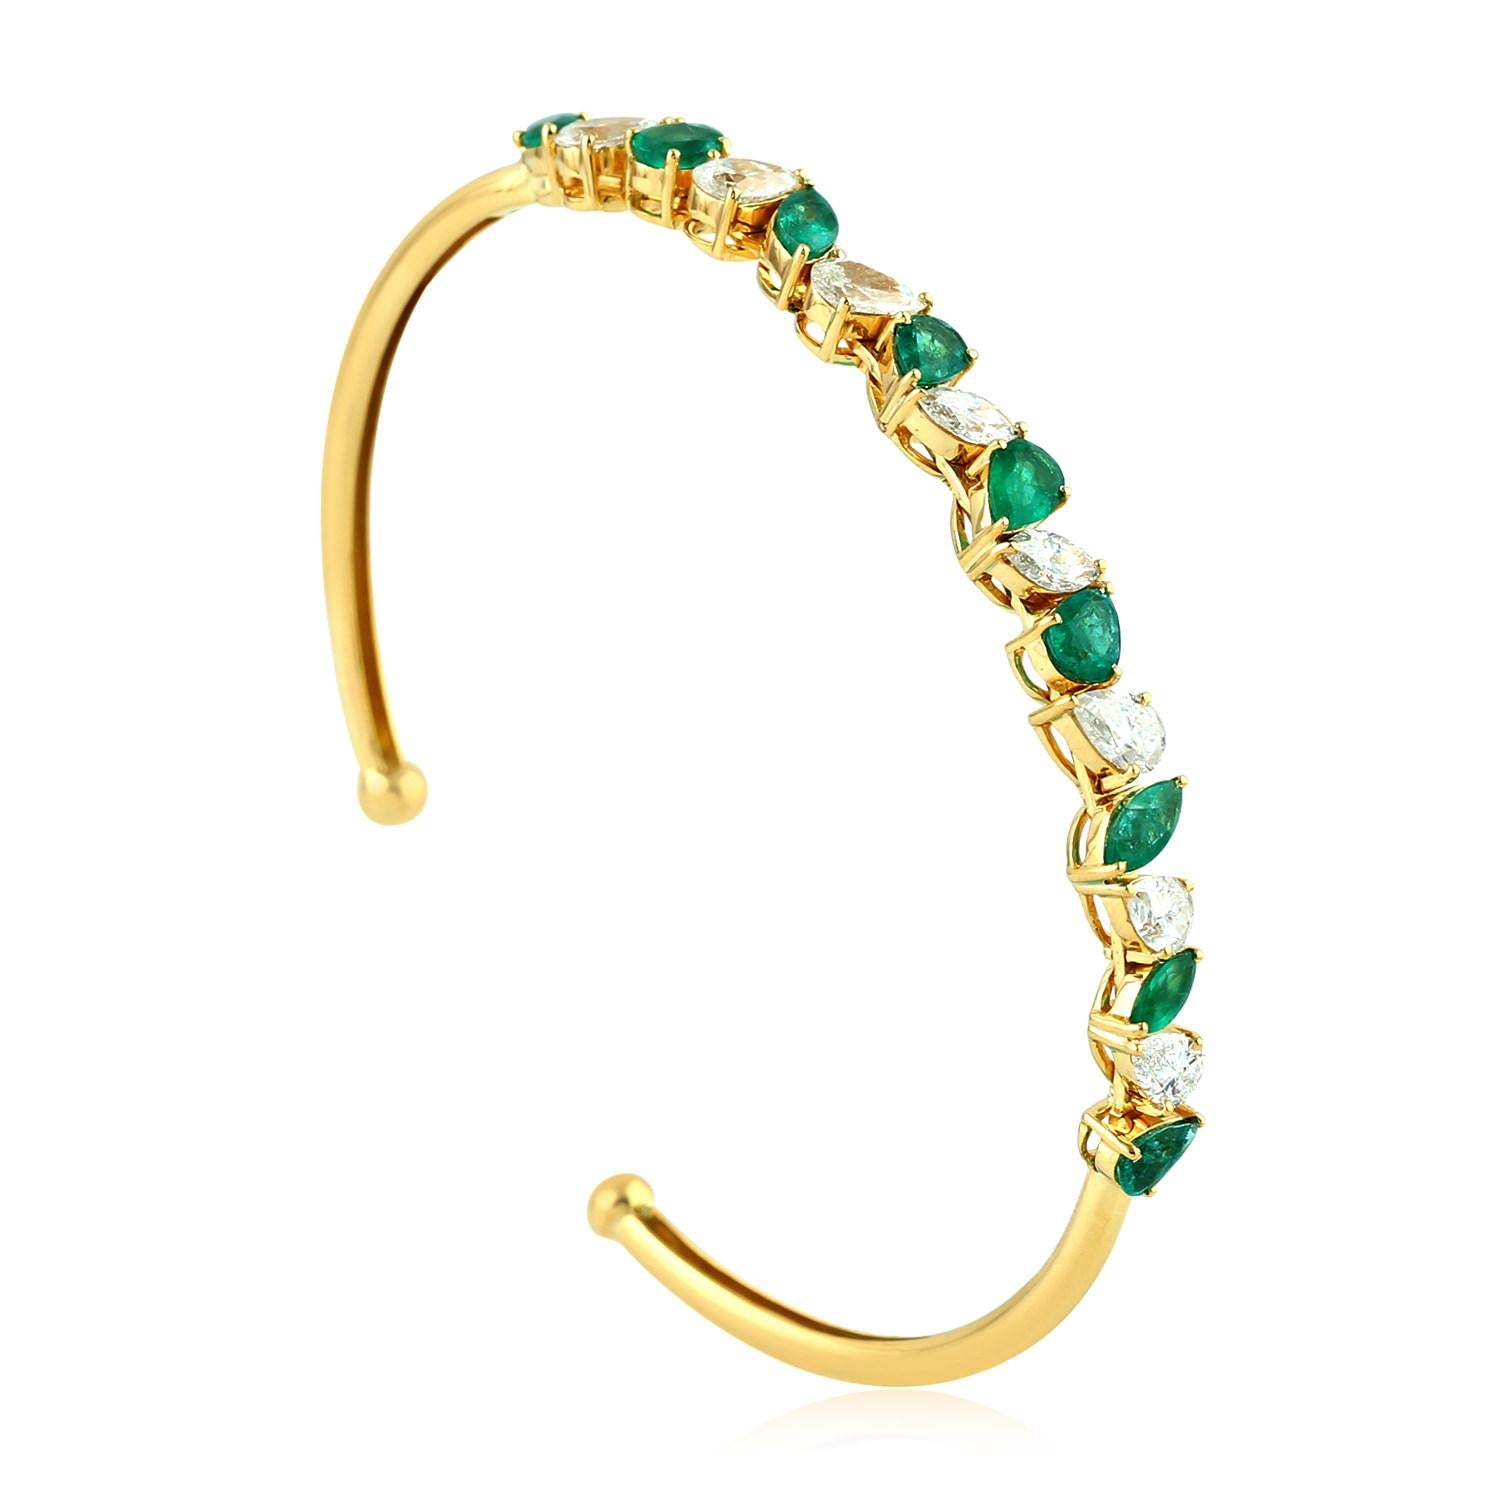 Mixed Cut Marquise Shaped Emerald & Diamond Bangle Made In 18k Gold For Sale